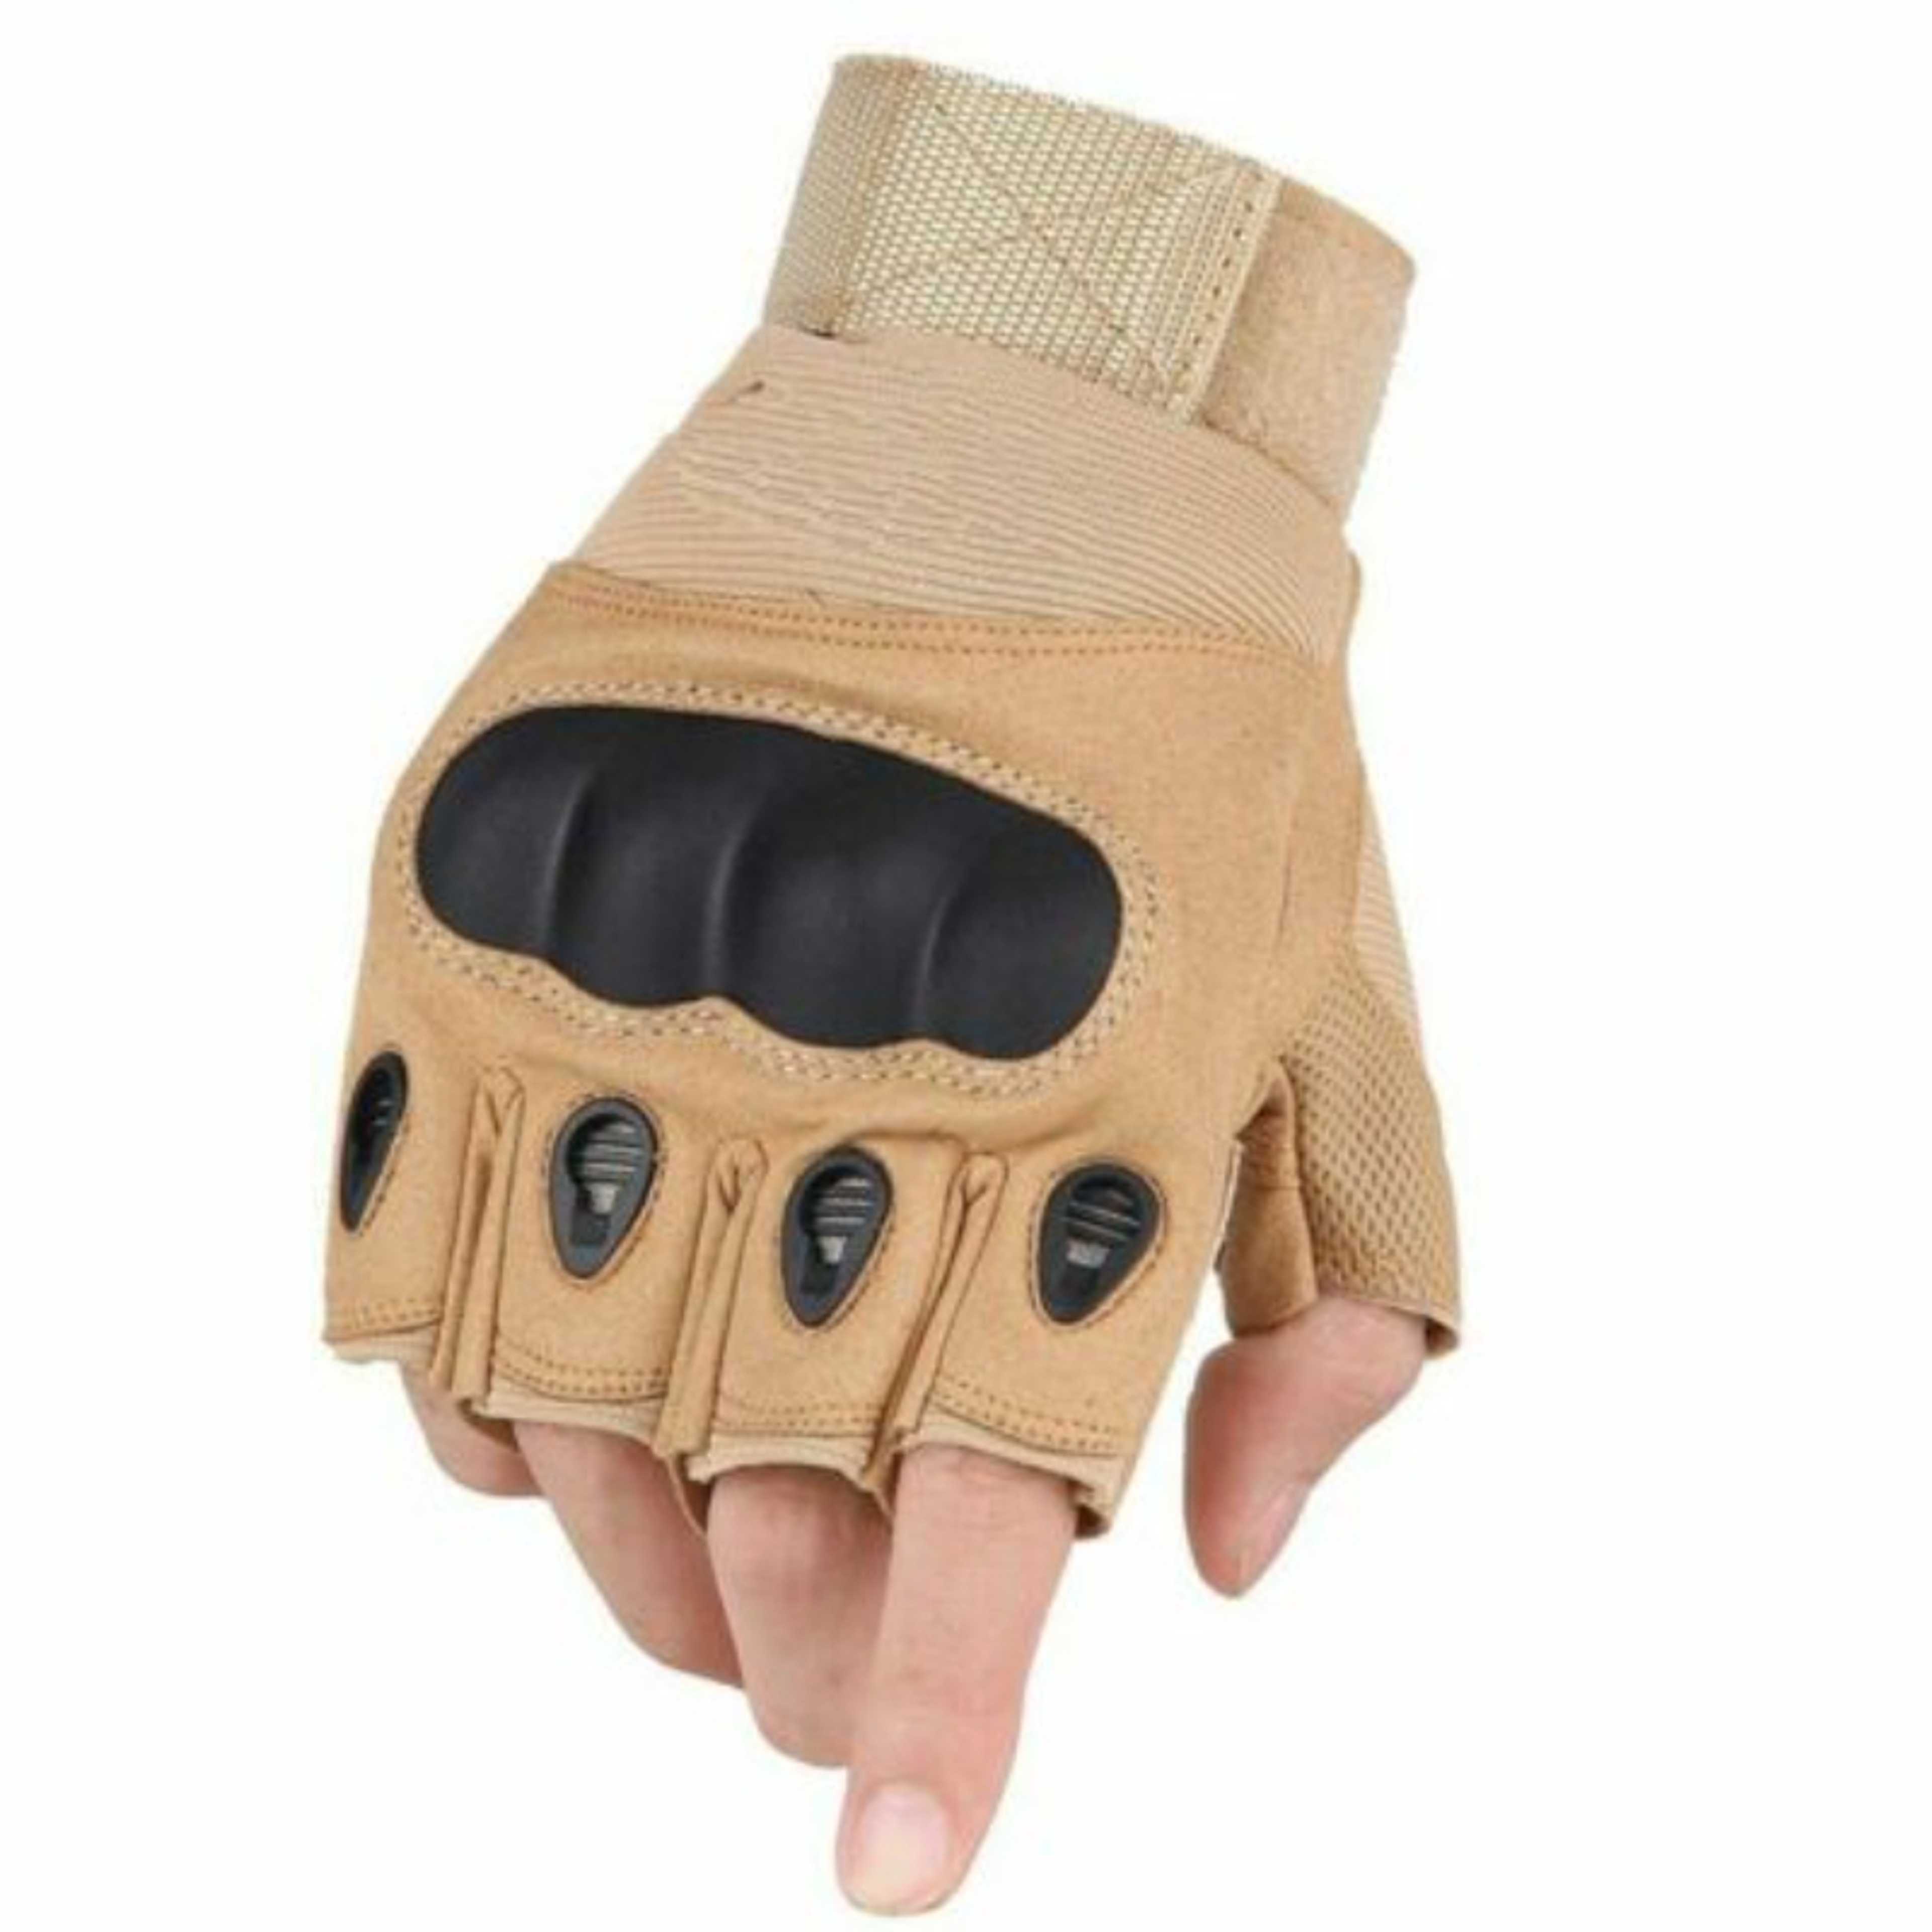 ALL PURPOSE HIKING CYCLING GLOVES - HALF FINGER - 1 PAIR Brown